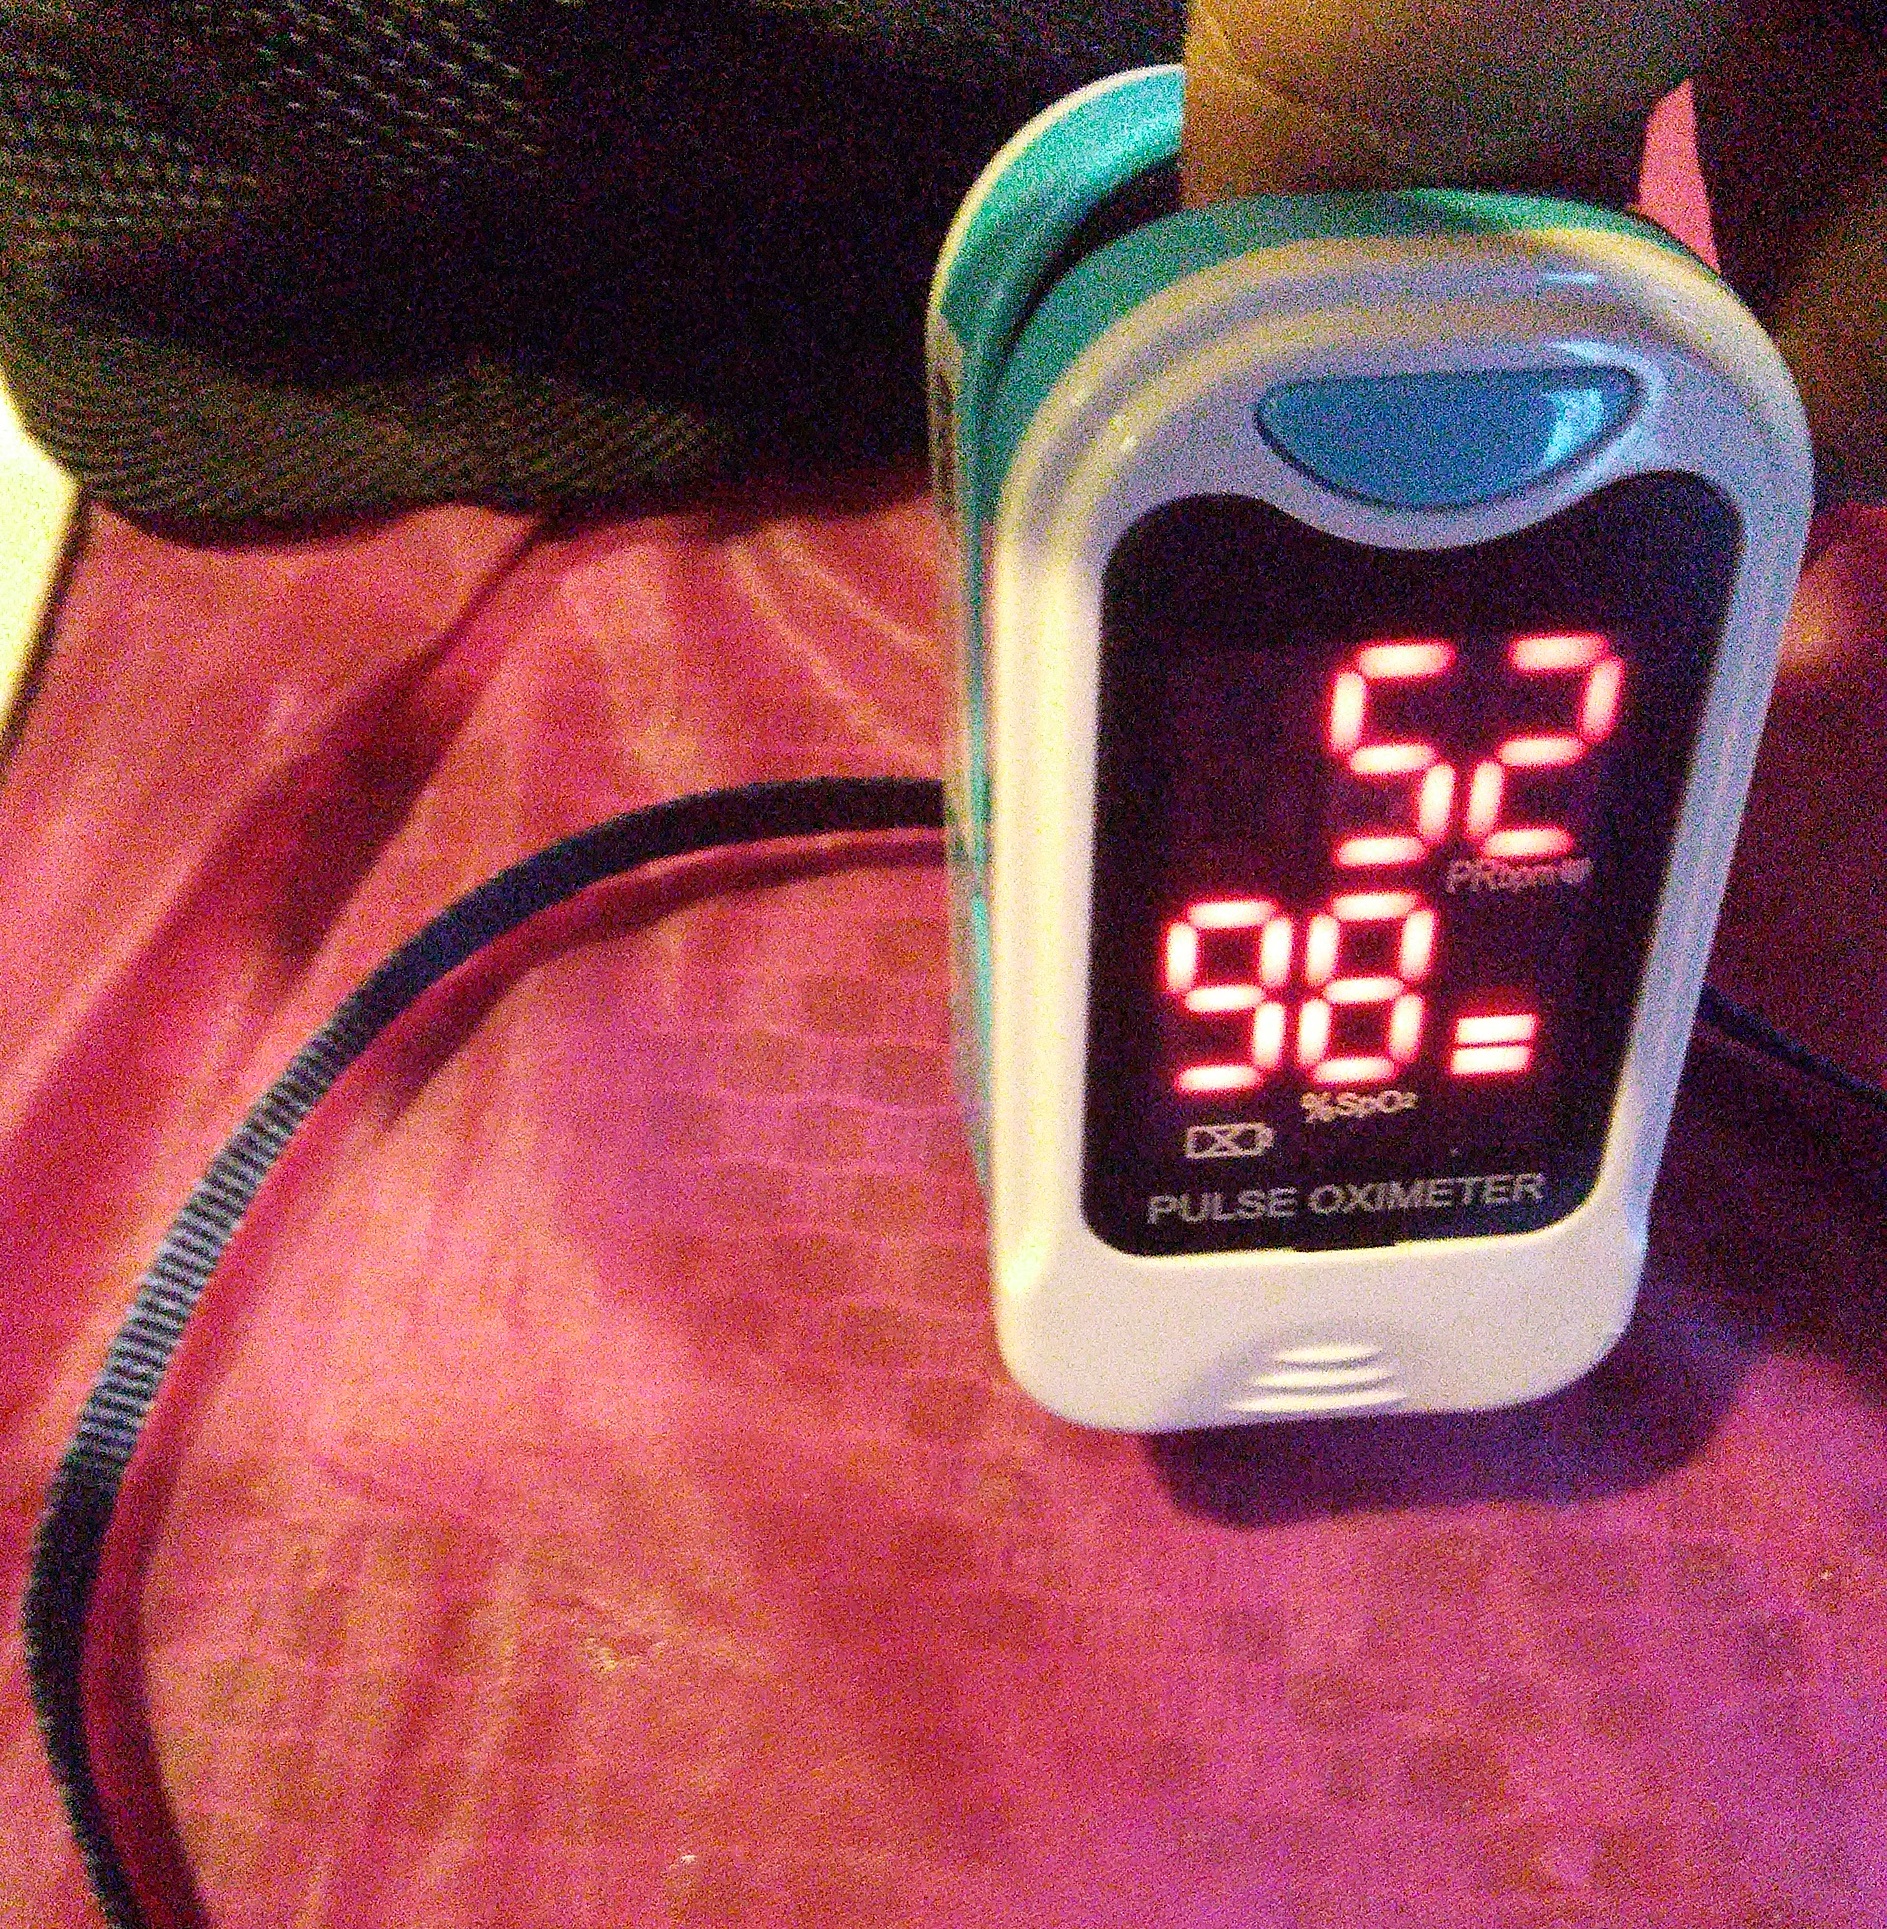 <p>Pulse Oximeter. An image of a pulse oximeter showing 98% oxygen saturation level and a heart rate of 52 bpm.</p>